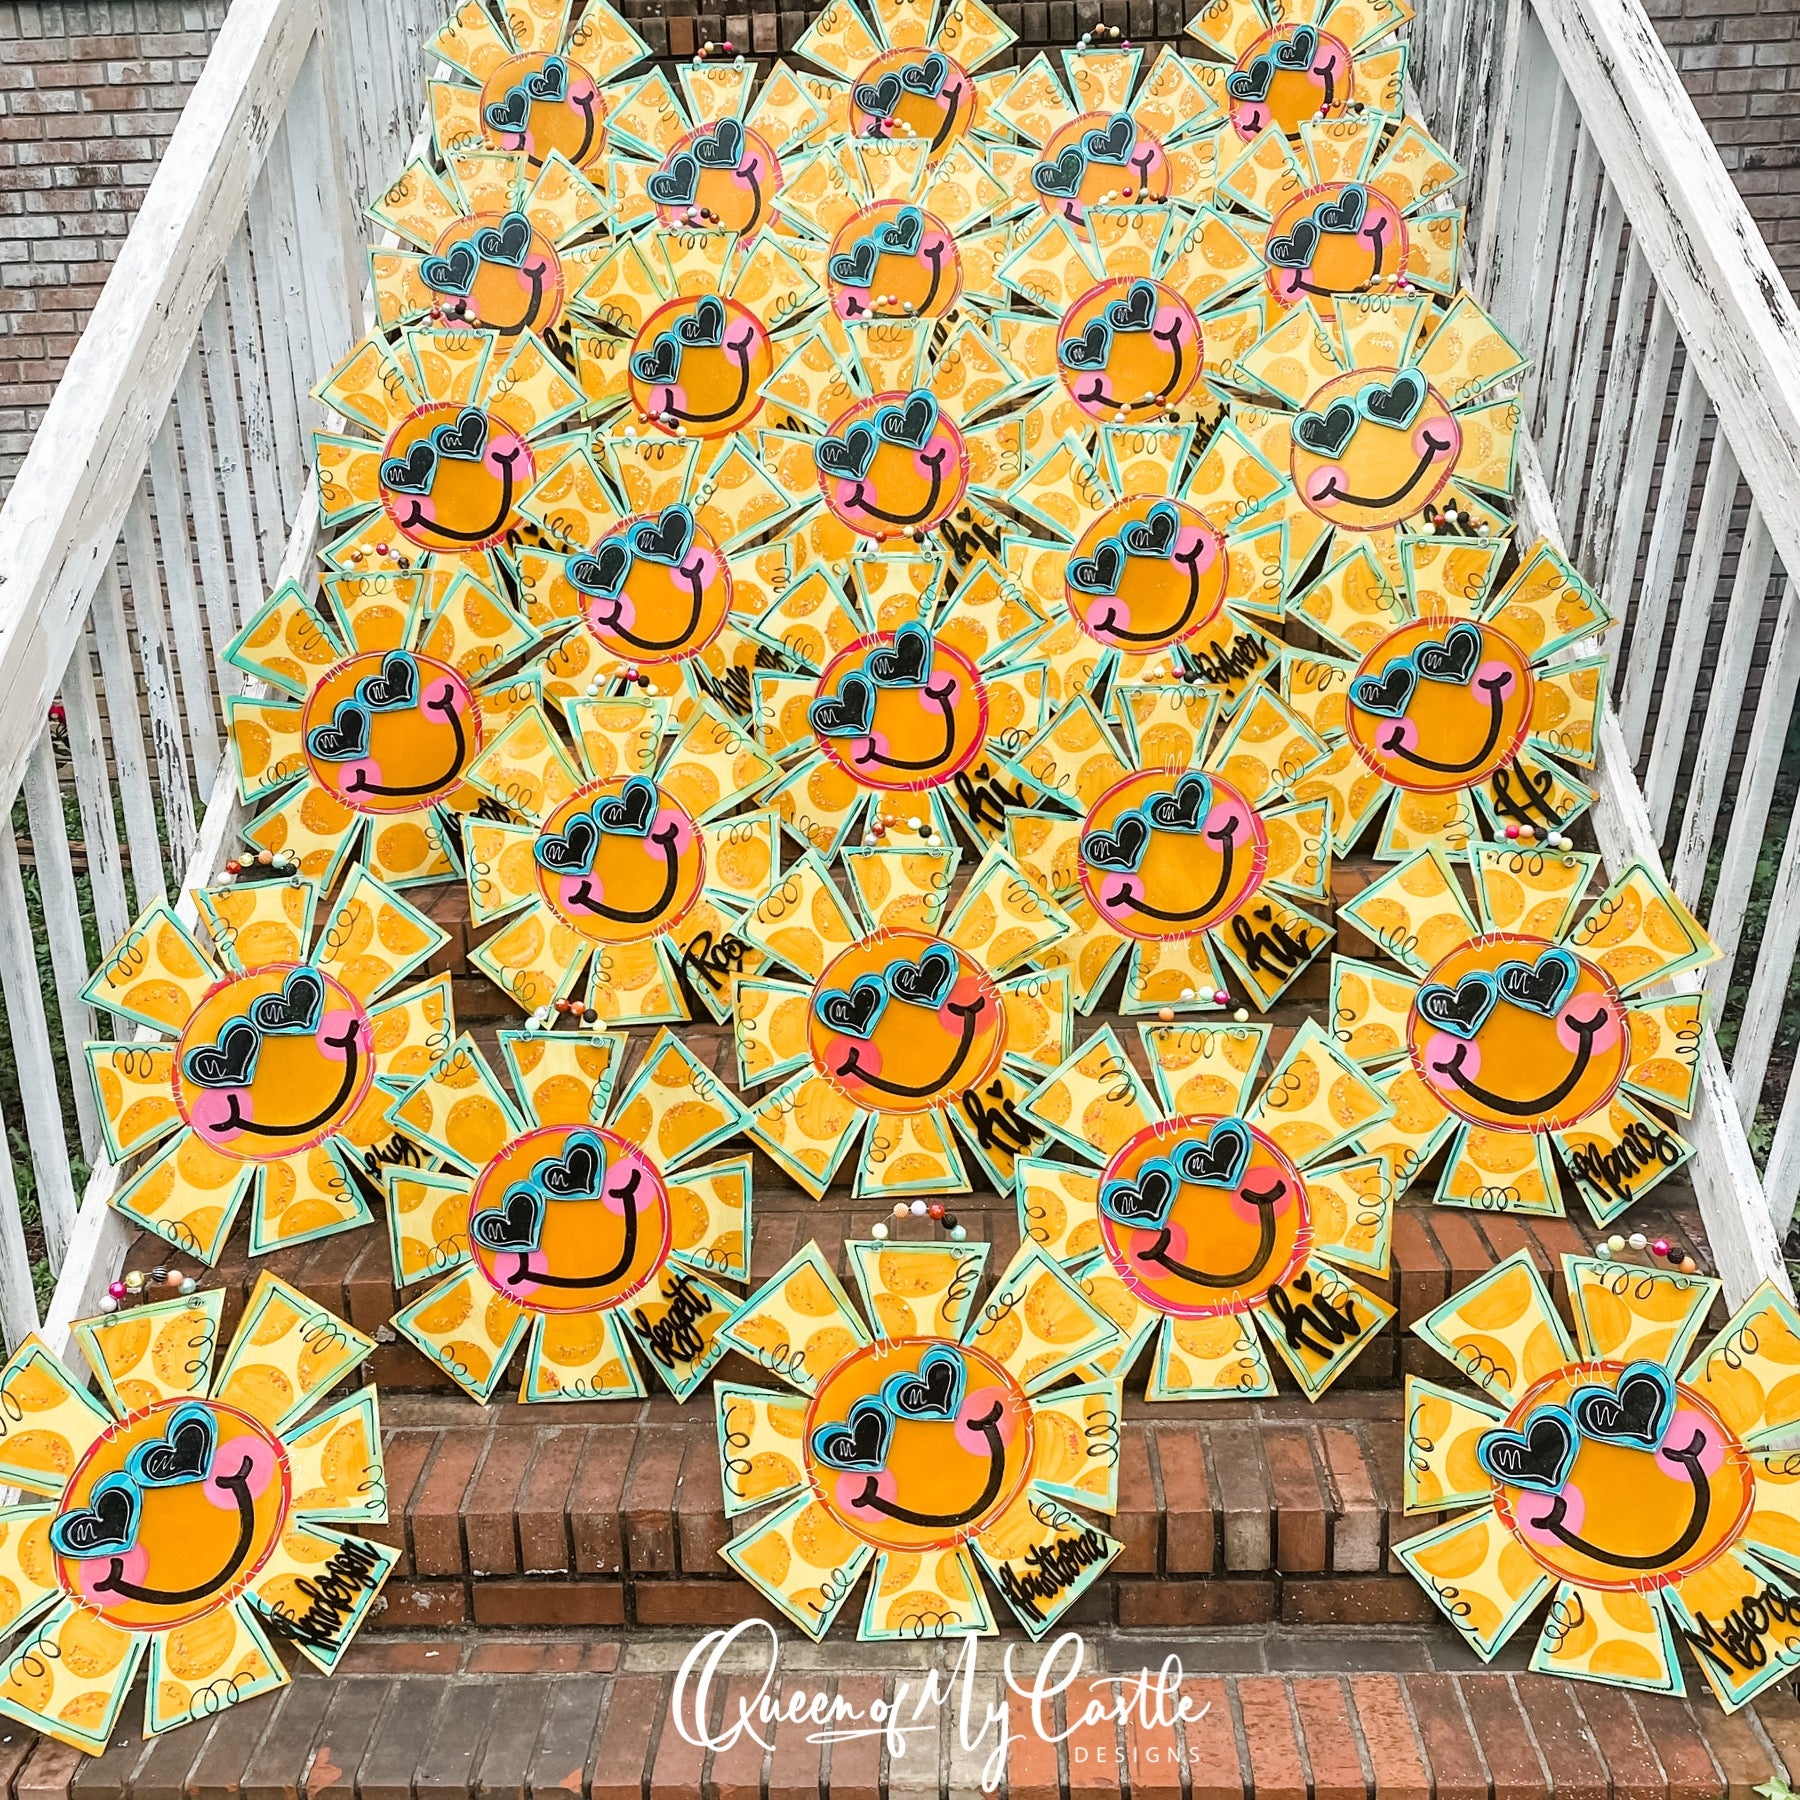 Many sun-shaped door hangers propped against steps.